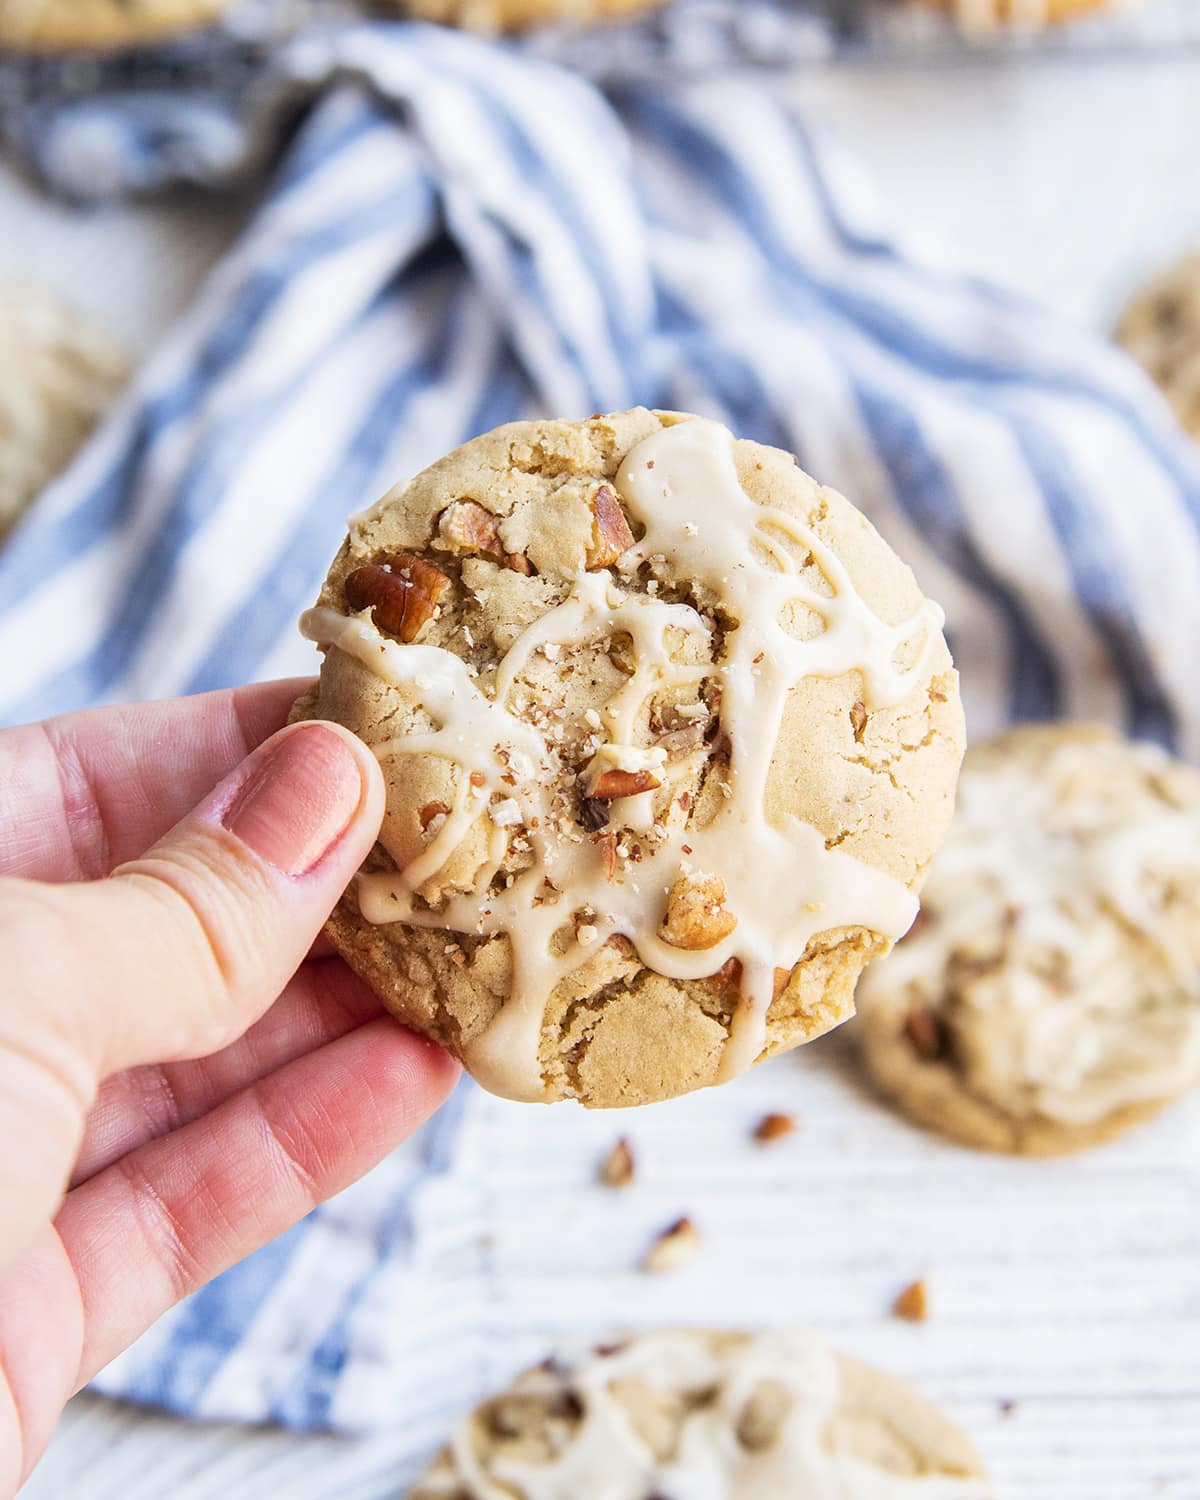 A hand holding a maple pecan cookie topped with a drizzle of maple icing, and pecan crumbs.